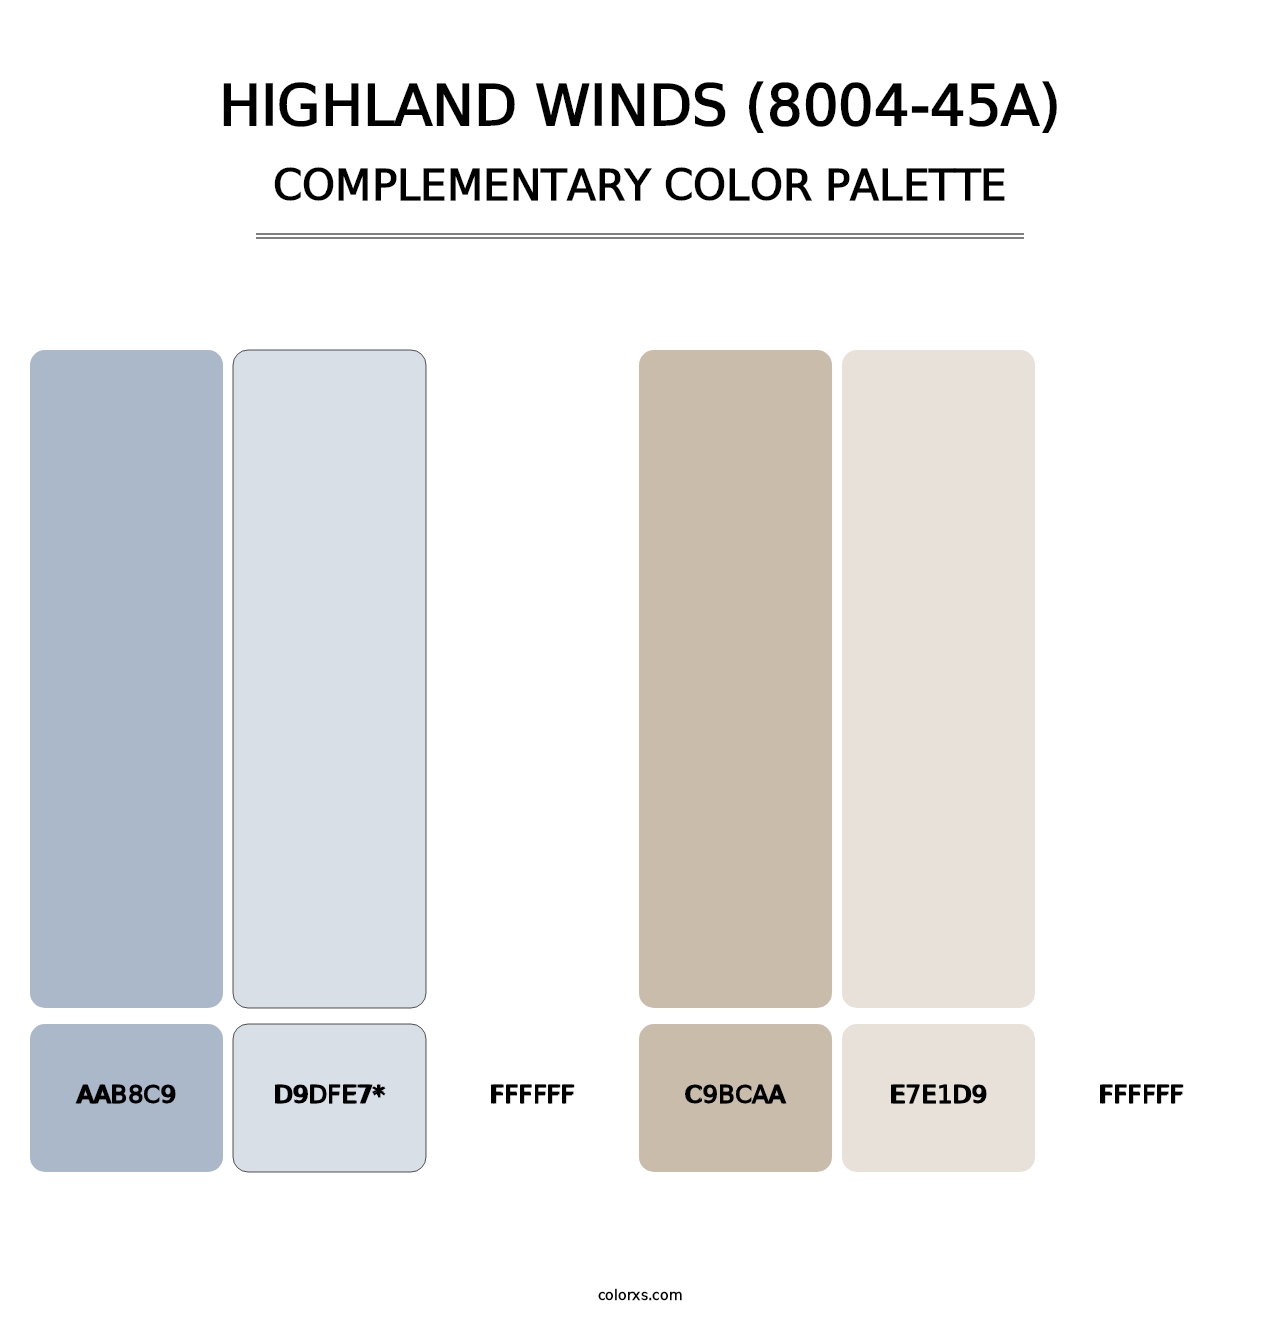 Highland Winds (8004-45A) - Complementary Color Palette